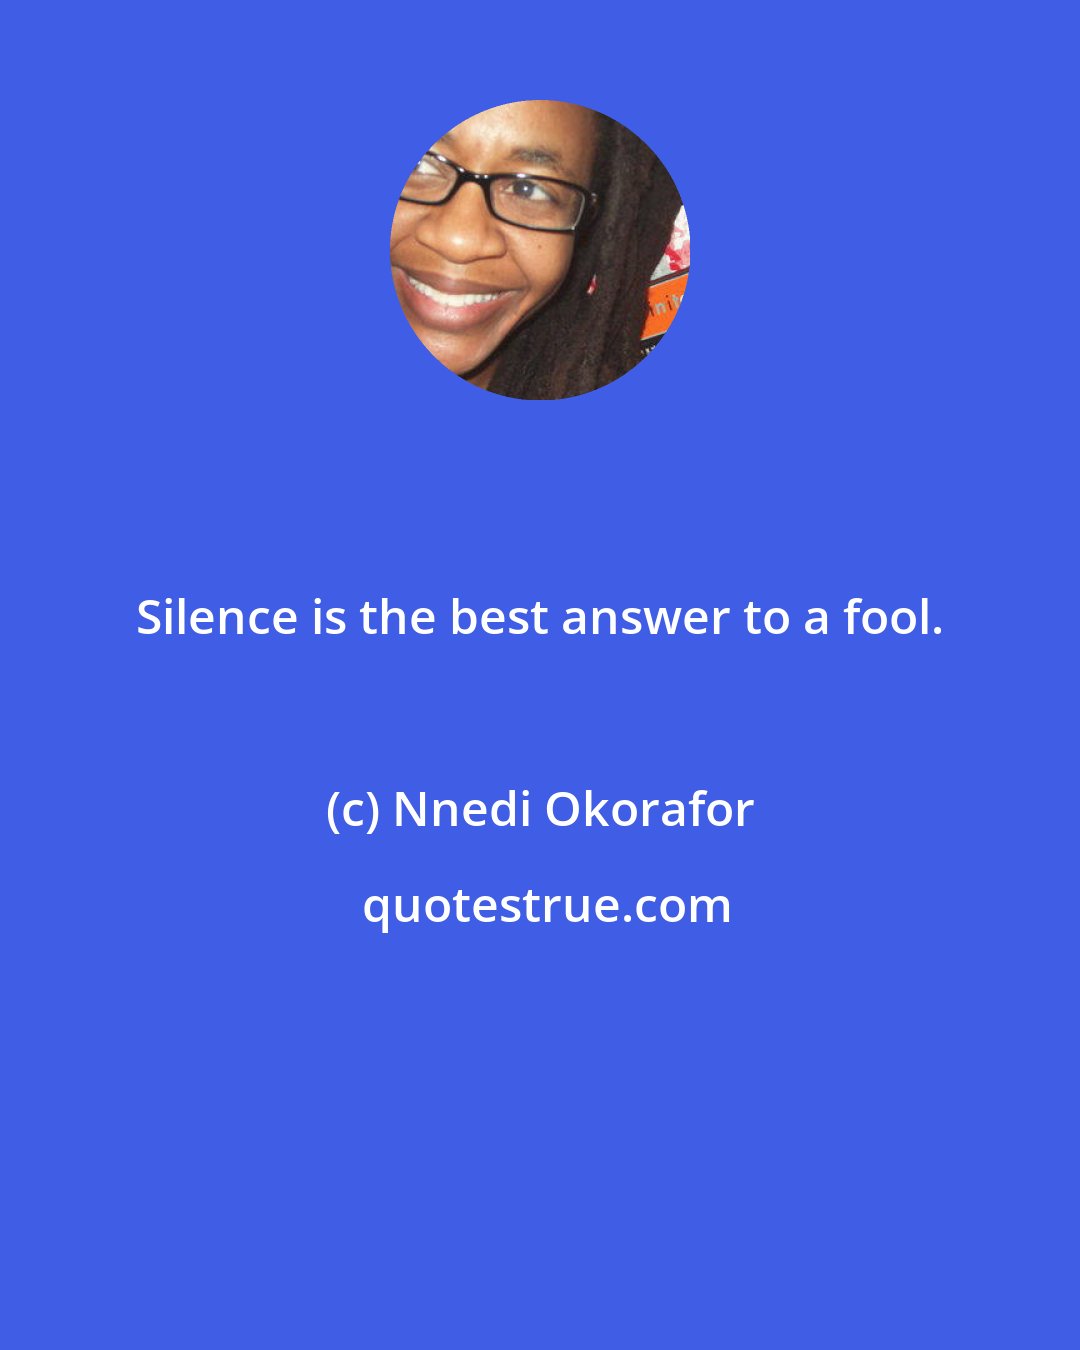 Nnedi Okorafor: Silence is the best answer to a fool.